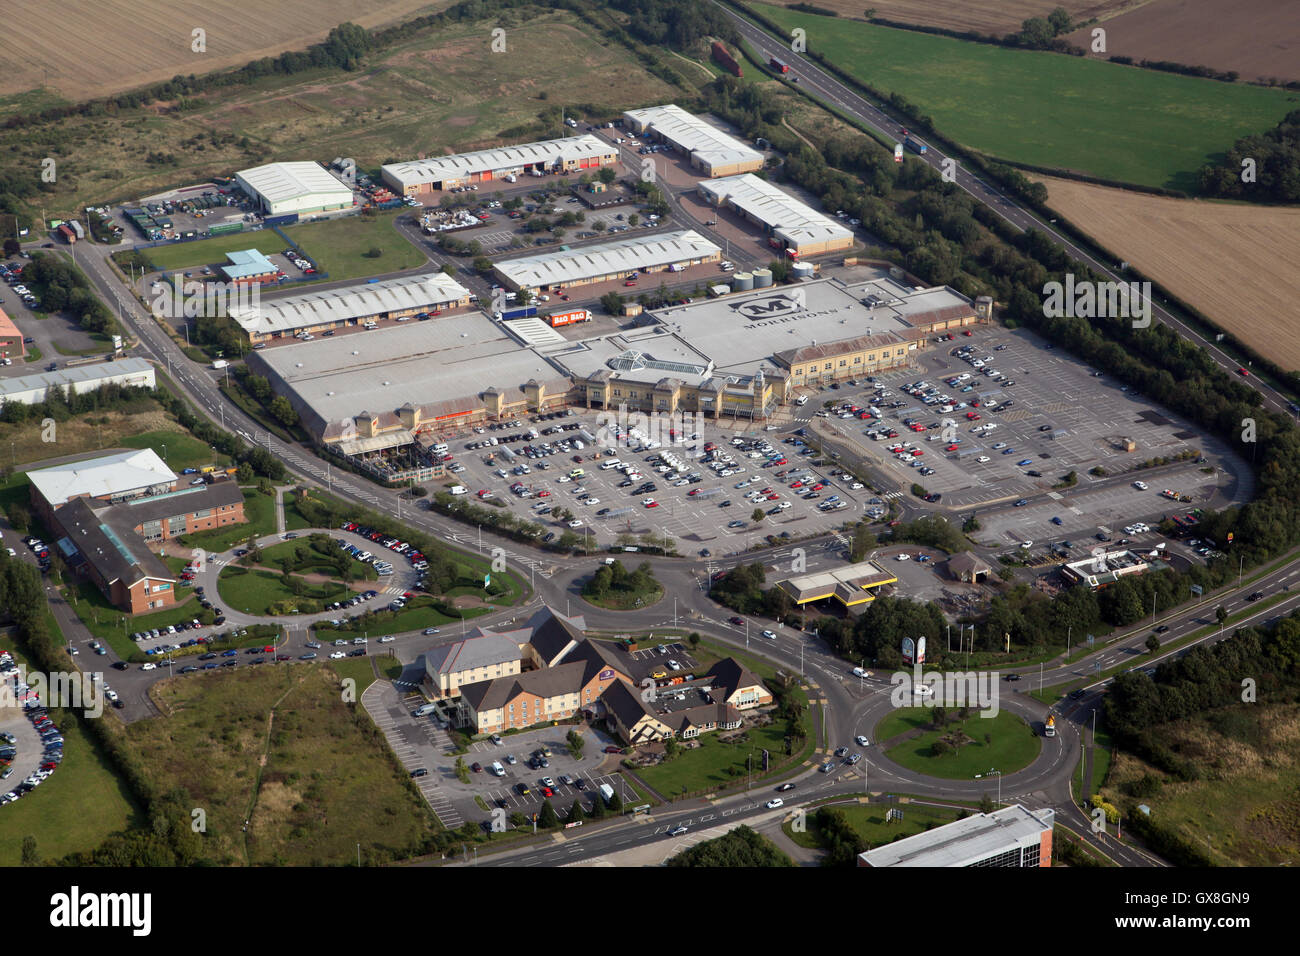 aerial view of the Morrisons superstore supermarket on the east side of Darlington, County Durham, UK Stock Photo